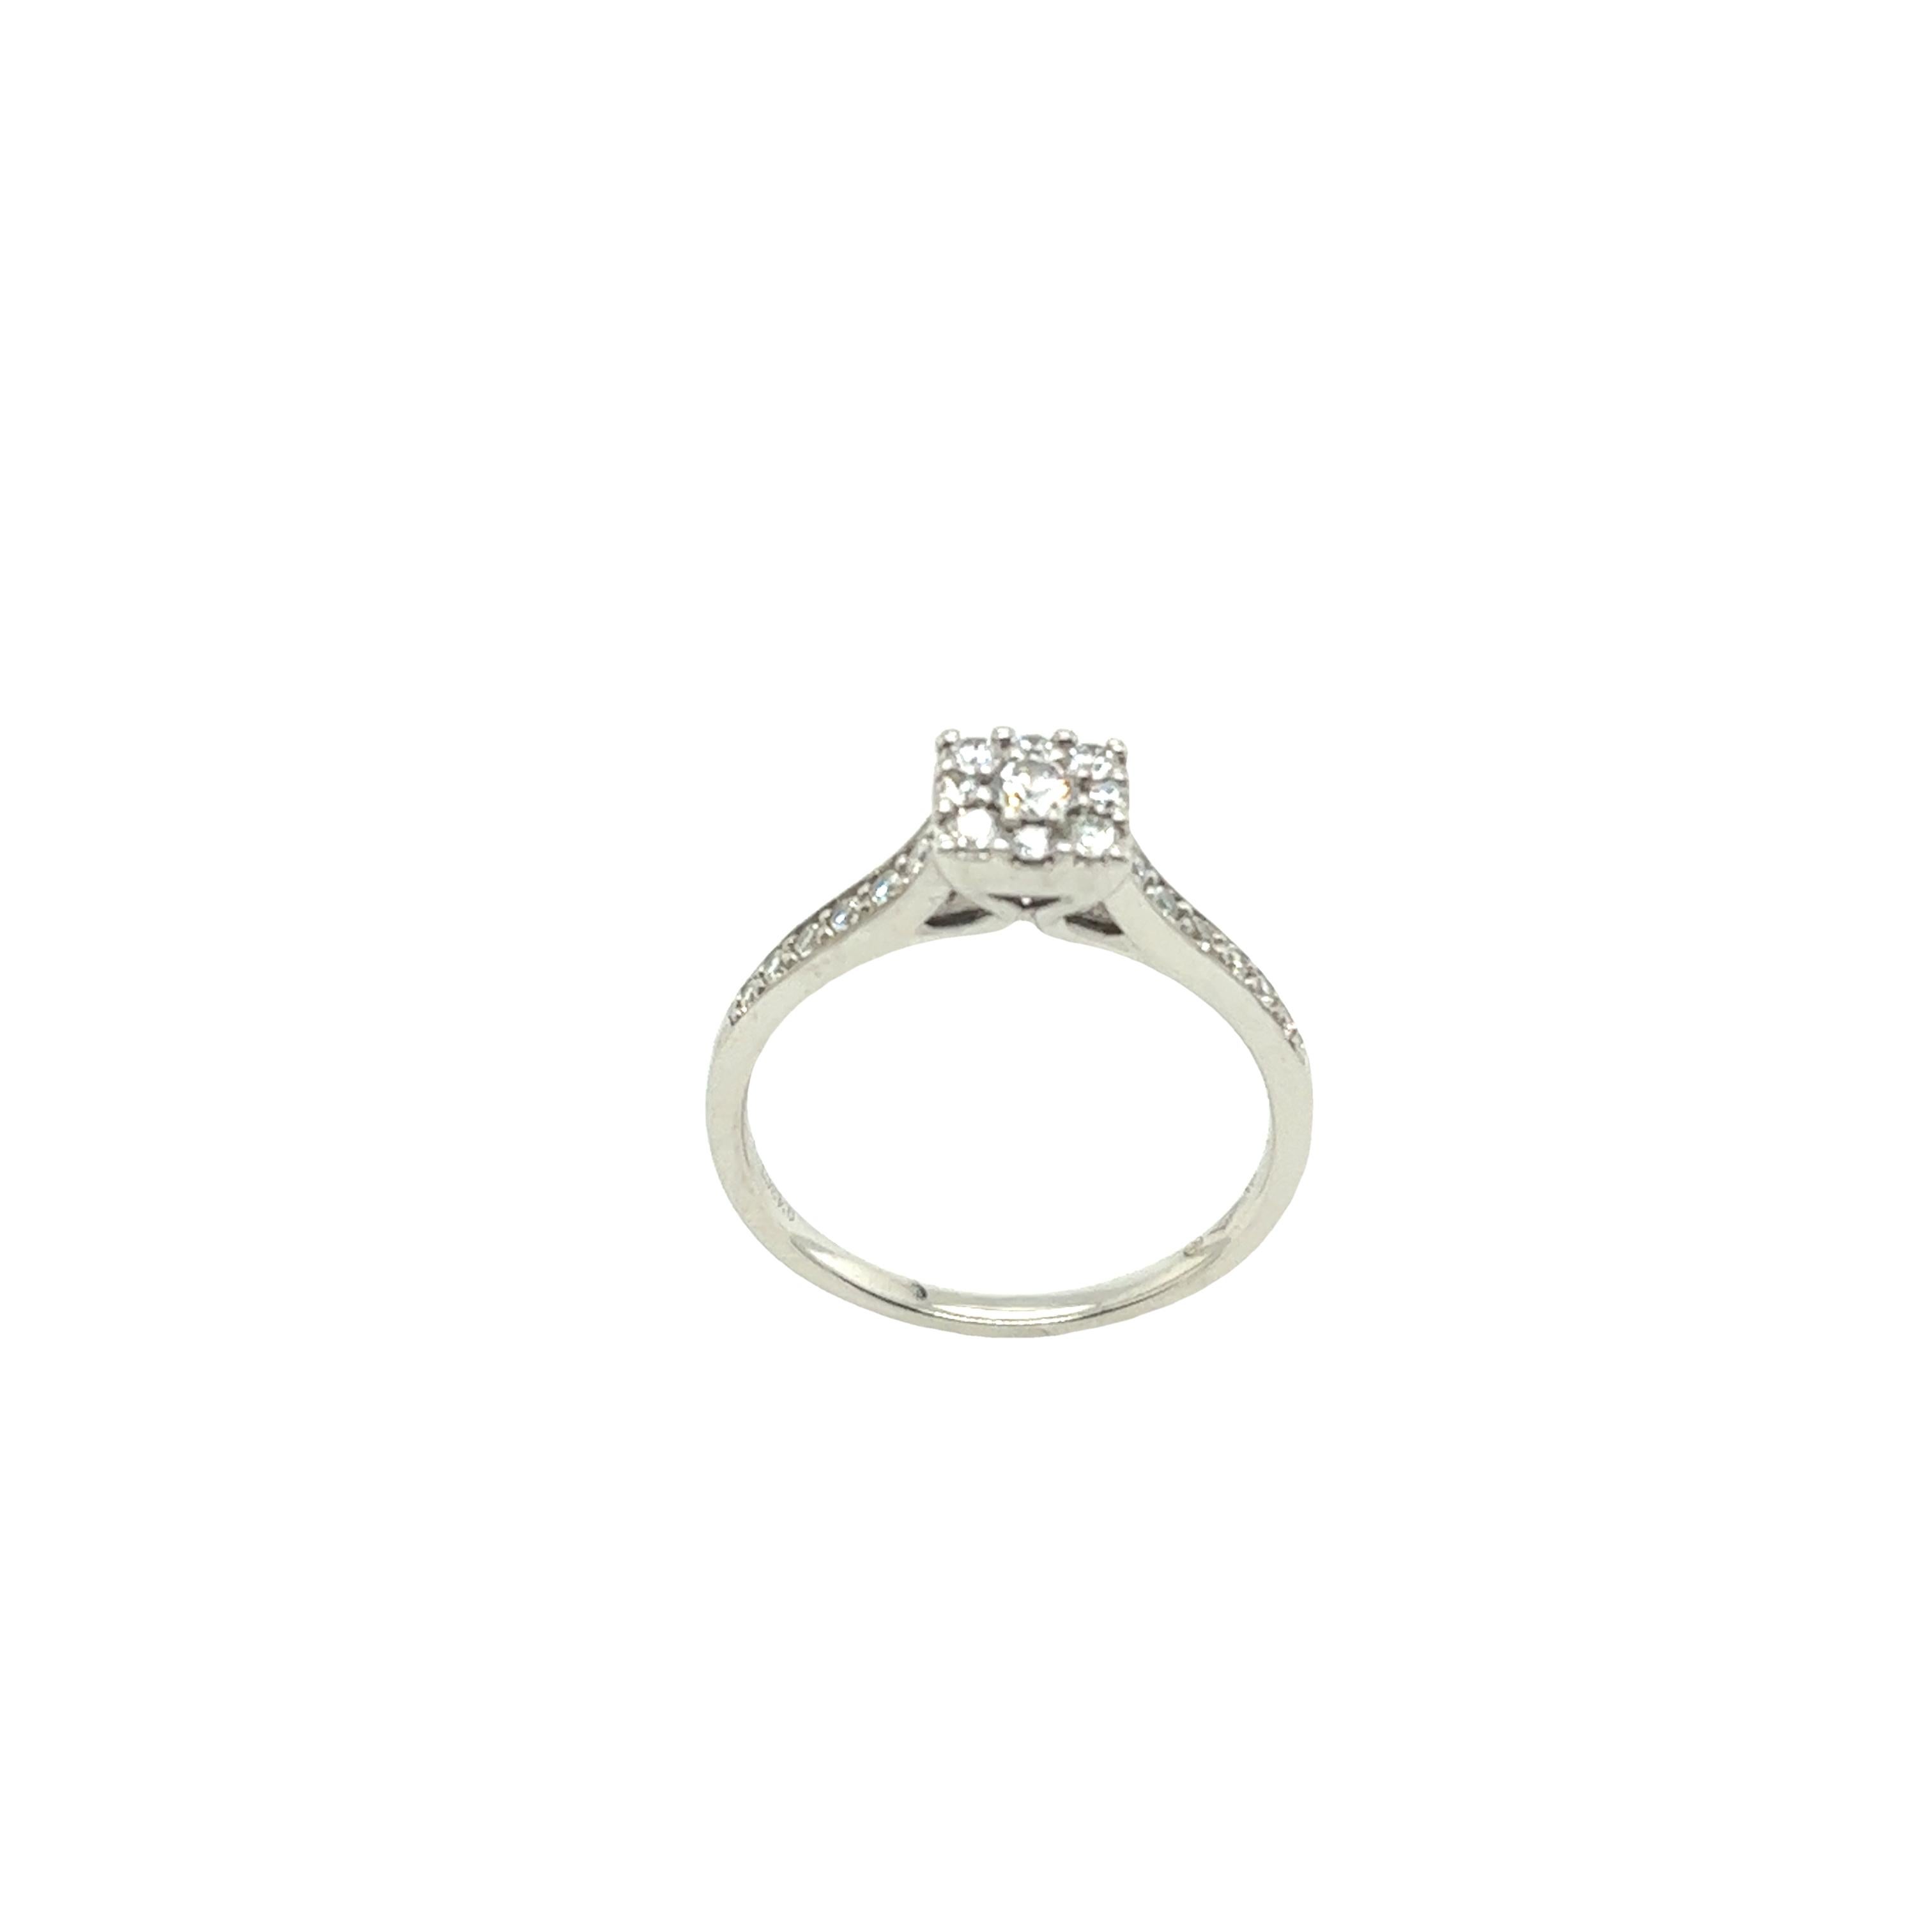 An elegant diamond ring for your engagement, set with 0.43ct round brilliant cut natural diamonds 
in a 9ct white gold setting. Beaverbrooks certificate.
Total Diamond Weight: 0.43ct
Diamond Colour: I
Diamond Clarity: I1
Width of Band: 1.50mm
Width